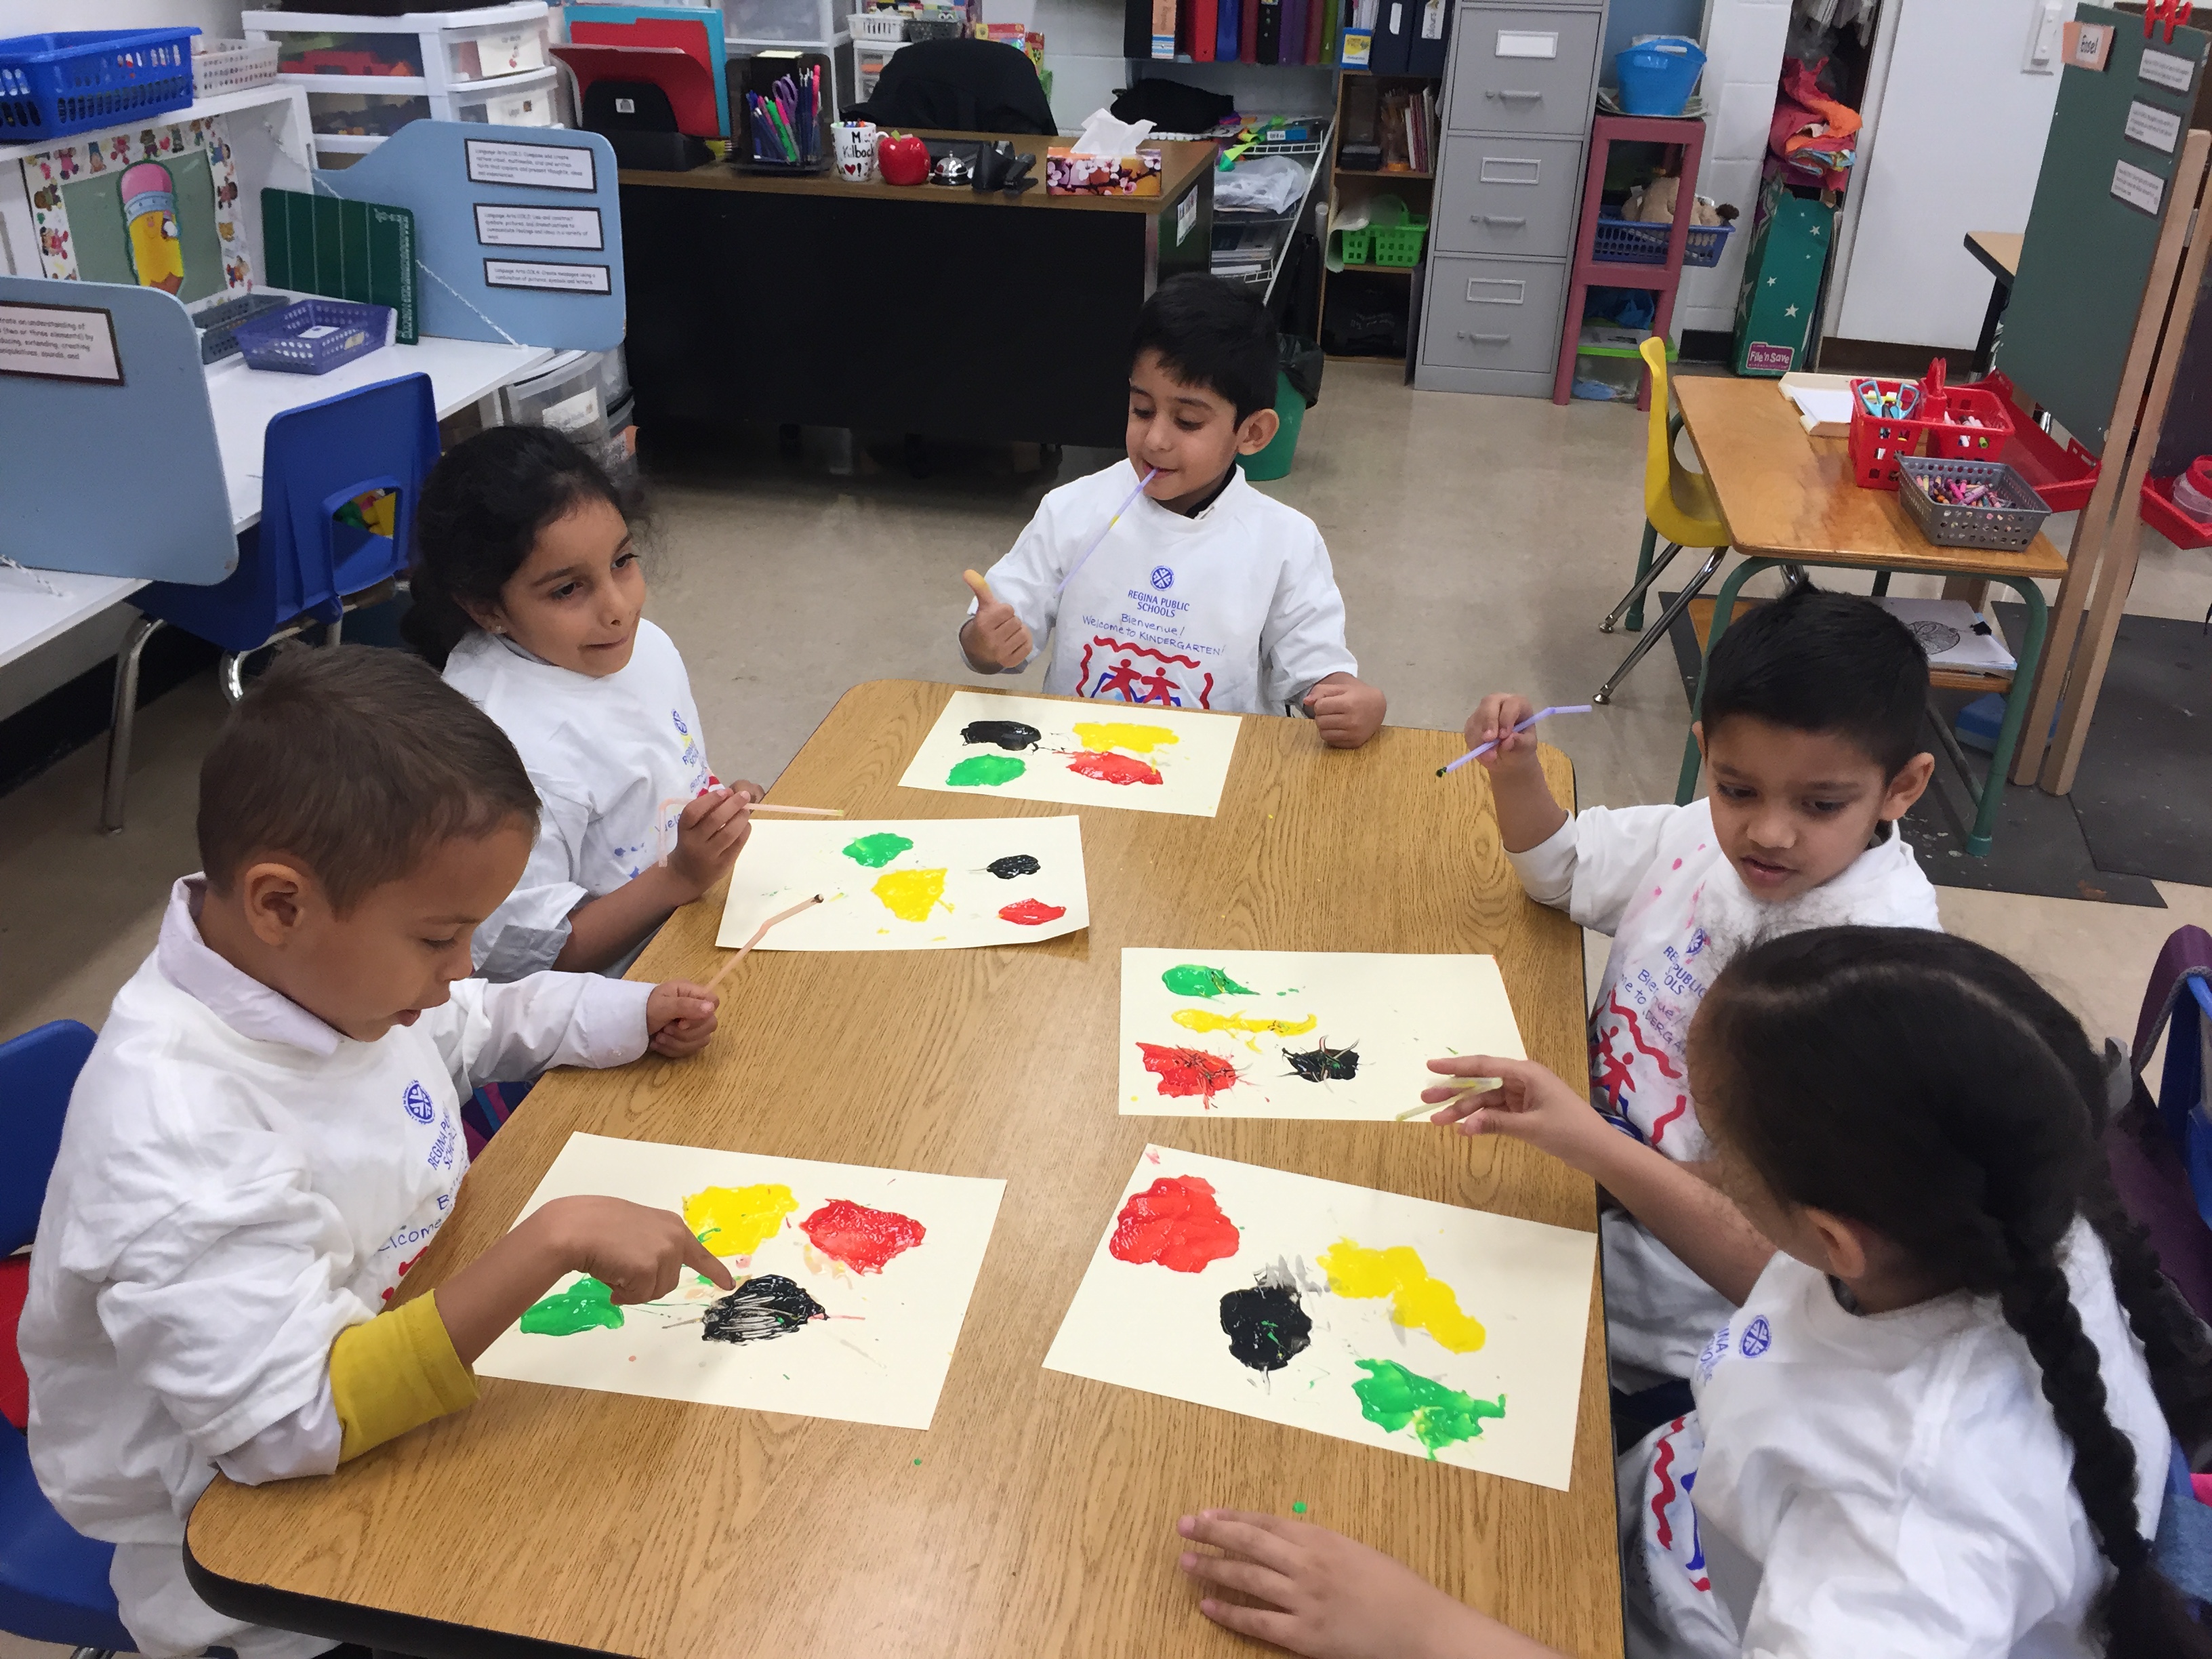 The Morning Kindergarten Students Blow Paint Monsters